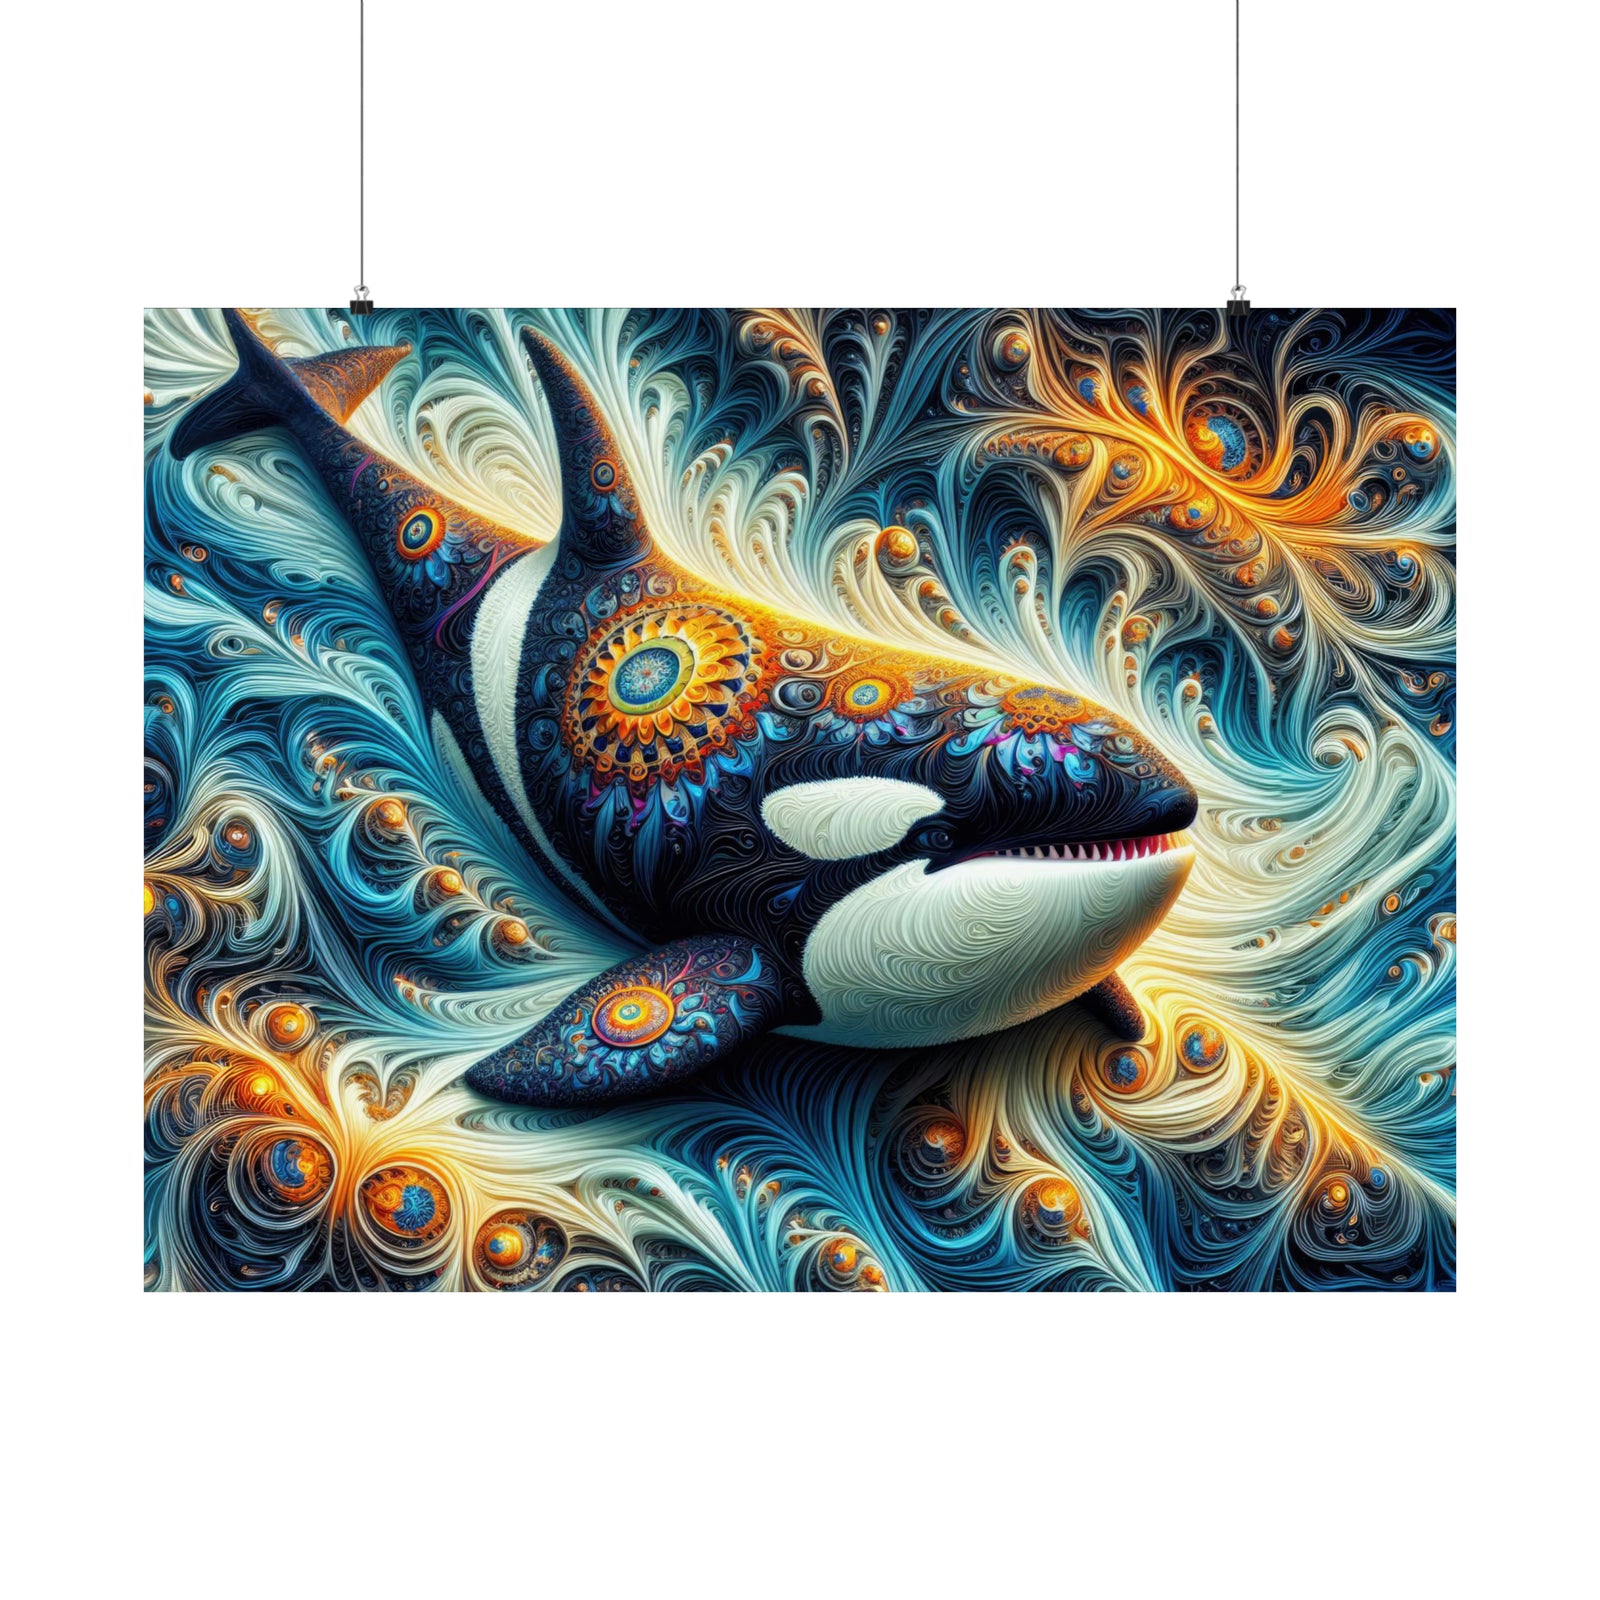 The Mandala Orca of the Abyssal Whorls Poster